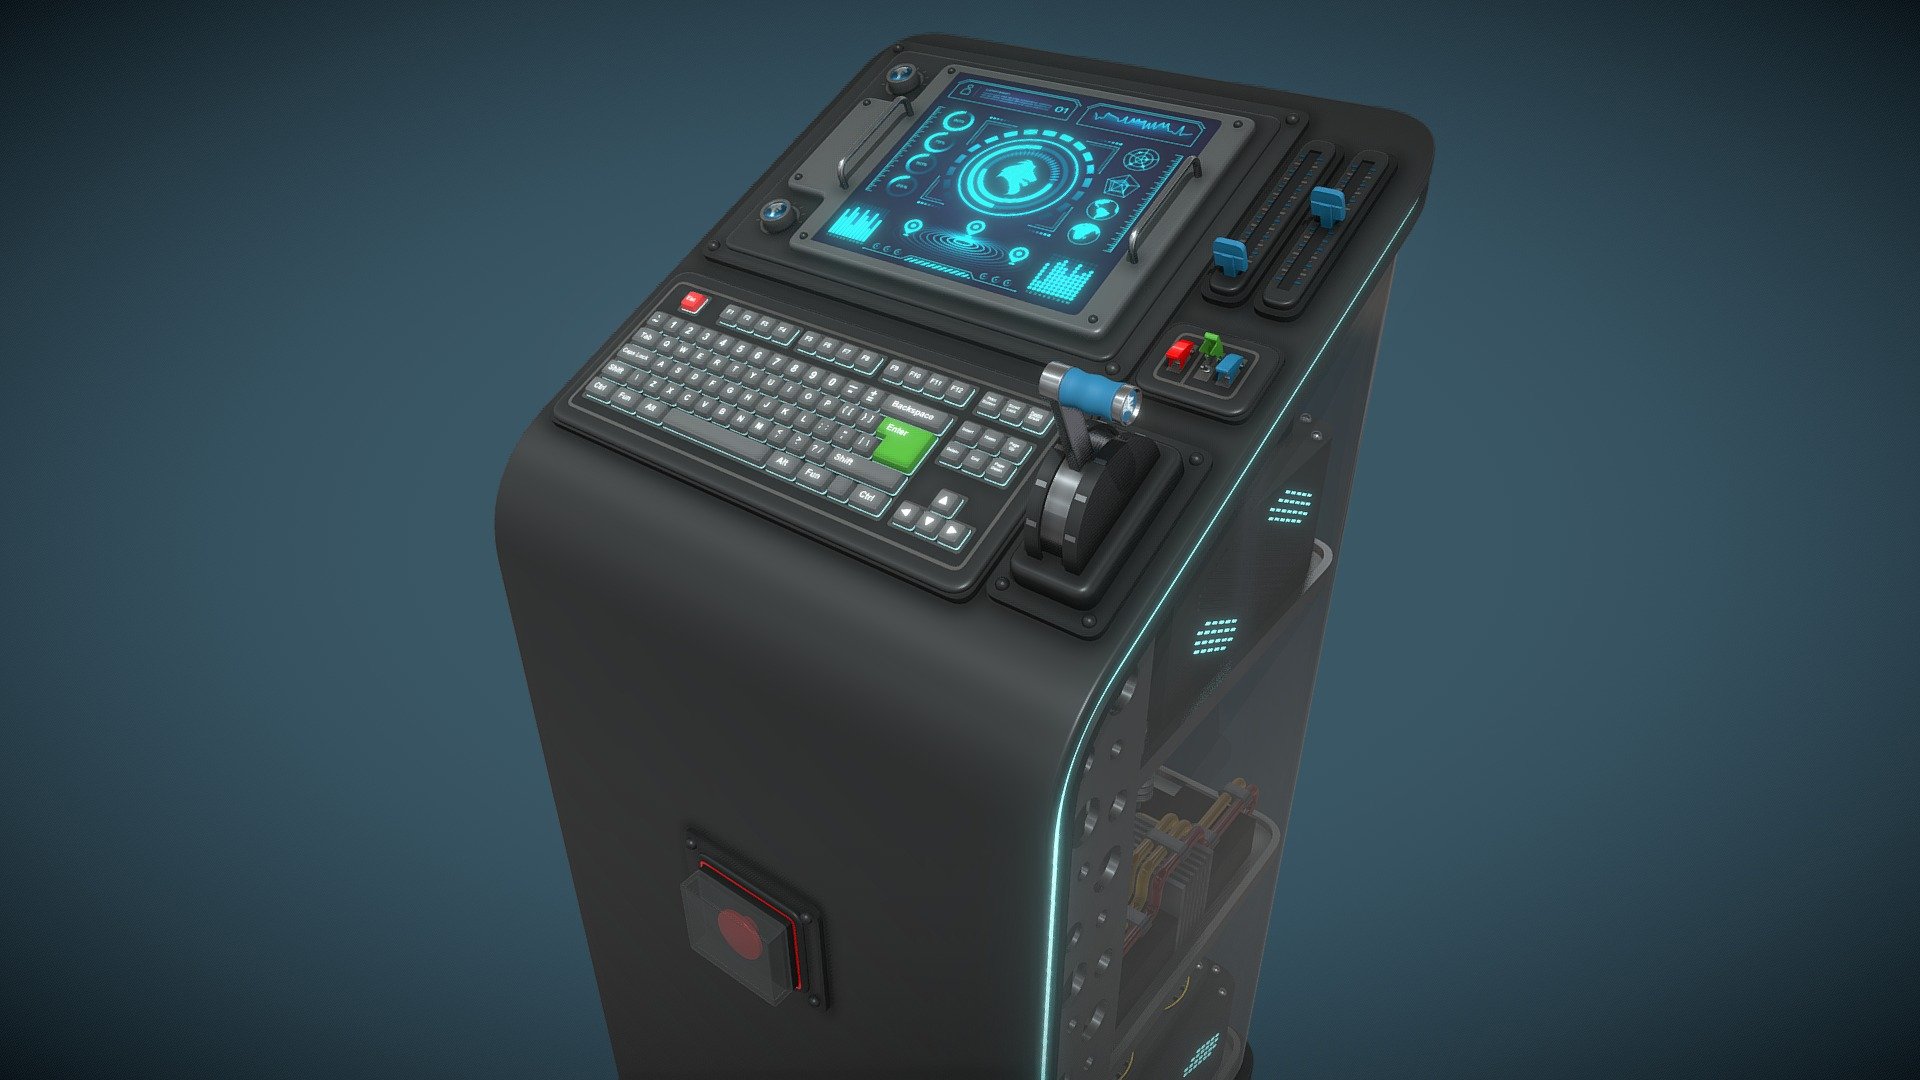 Sci-Fi Control Panel 2 3D model with animation created by Shubbak3D.

All Formats Size: 377 MB

Zip File Size: 95.6 MB

(Polys Count: 248468) (Verts Count: 220903)

Available Formats: .Max (3Ds Max 2021 Default) .3ds .bin .Dae (Collada) .dwf .dwg .fbx .gltf .jt .skp (Sketchup) .stl .obj+mtl .u3d

If you are interested in this model, feel free to contact us.

You can also find more Sci fi 3D models from this collection Sci-Fi 3d model